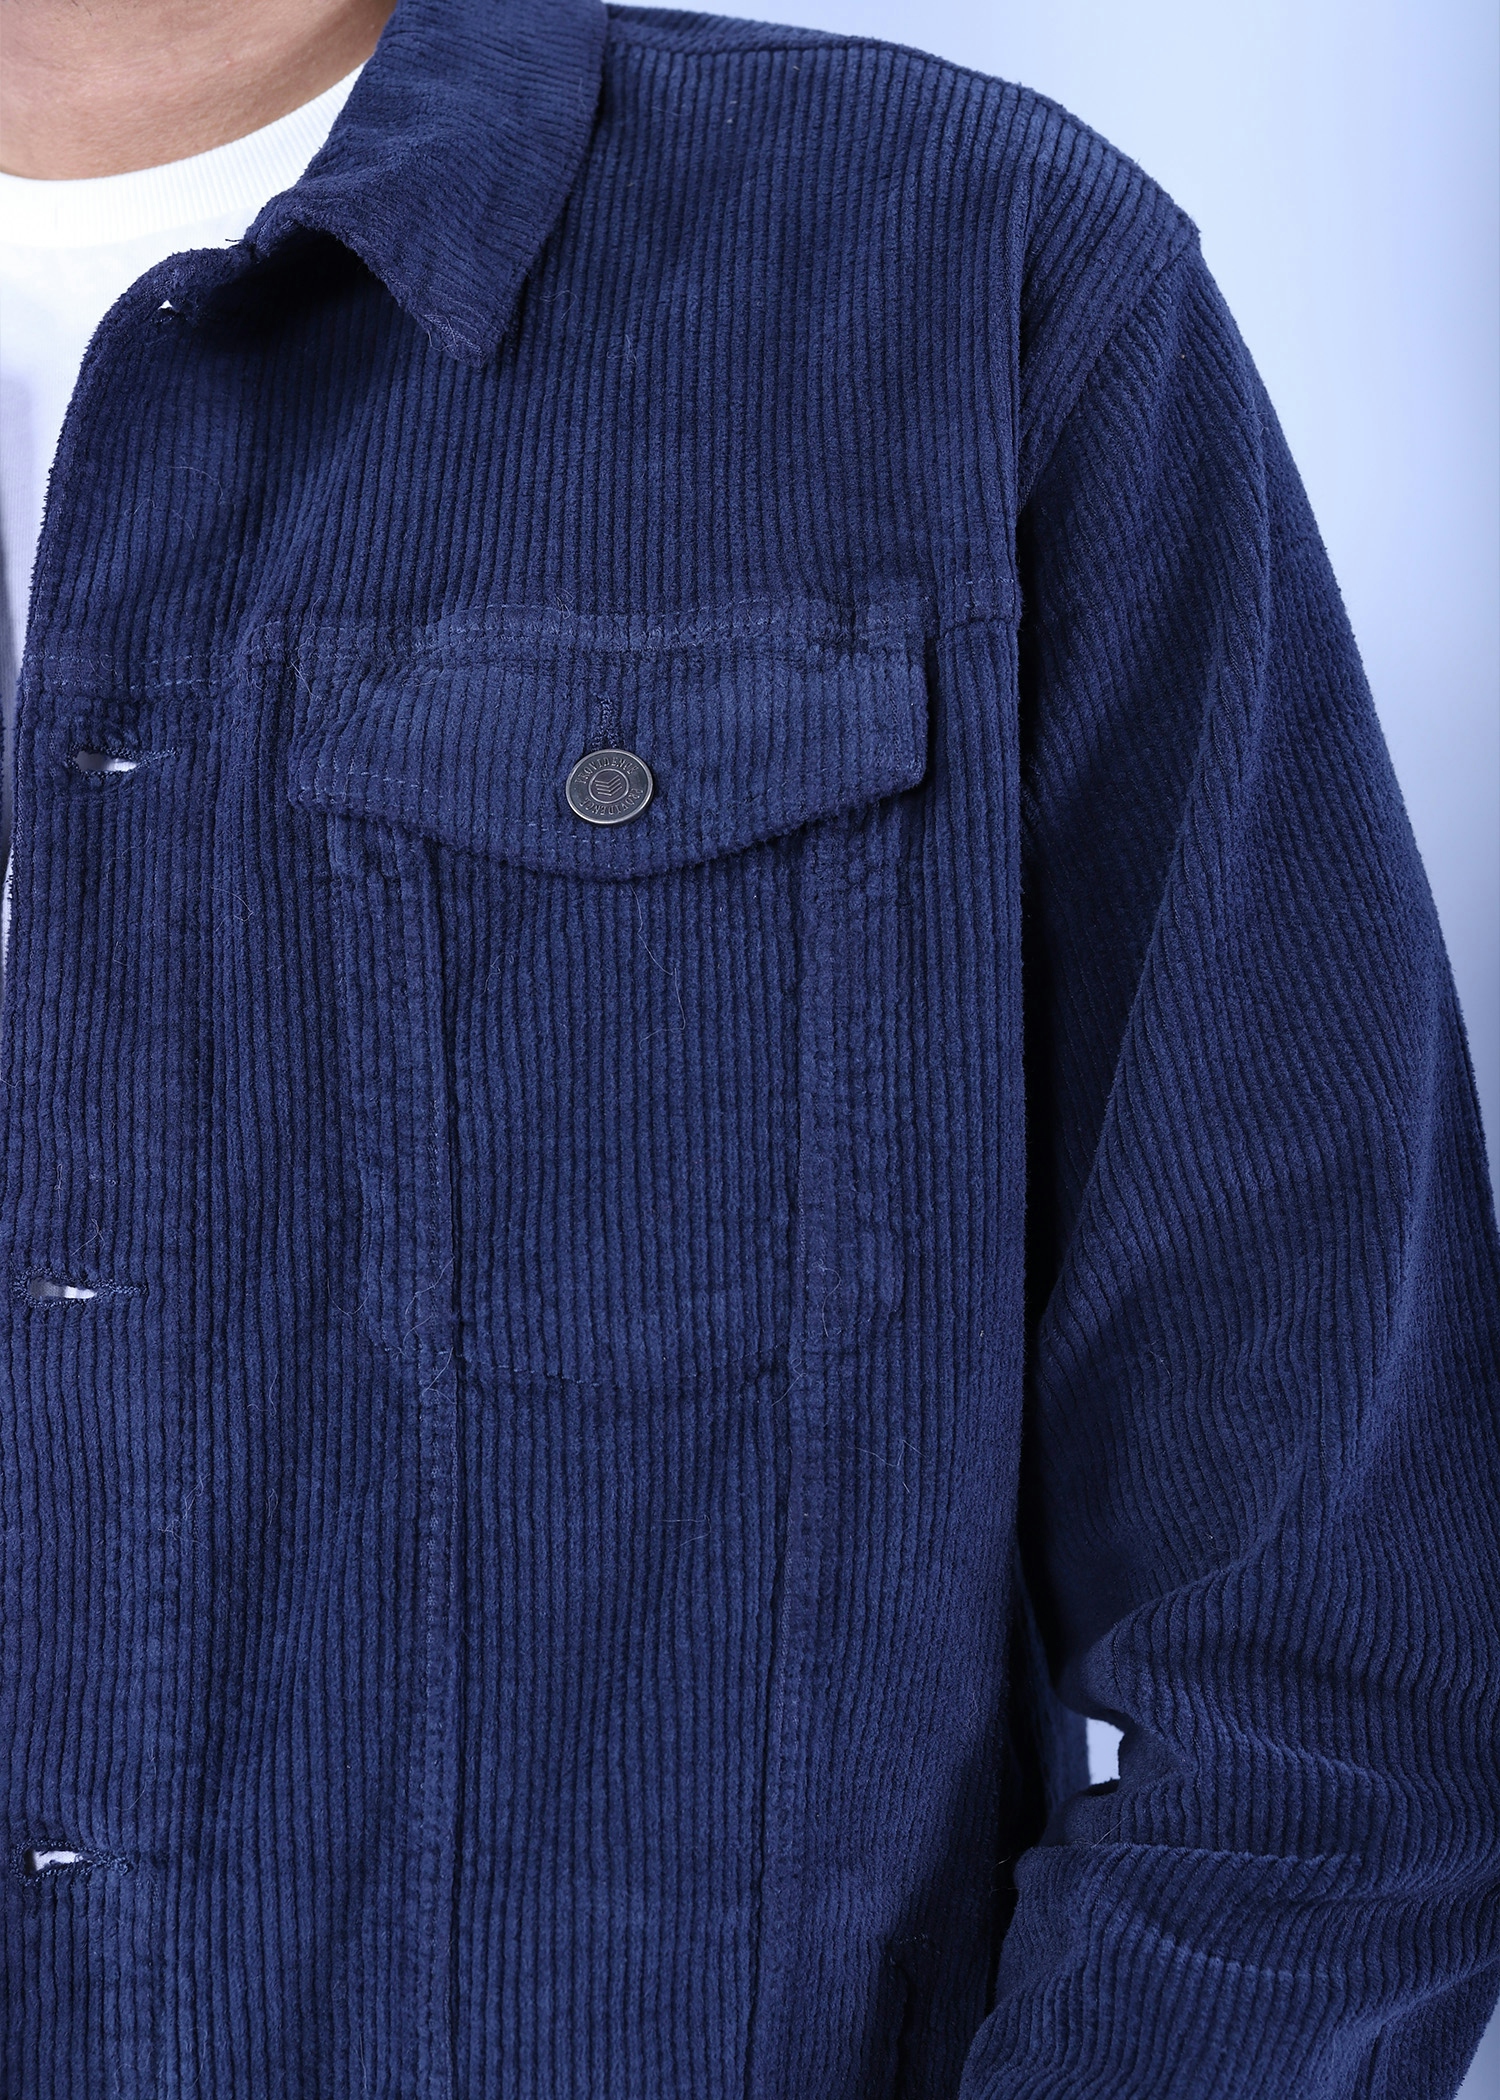 snipe cord jacket navy color close front view